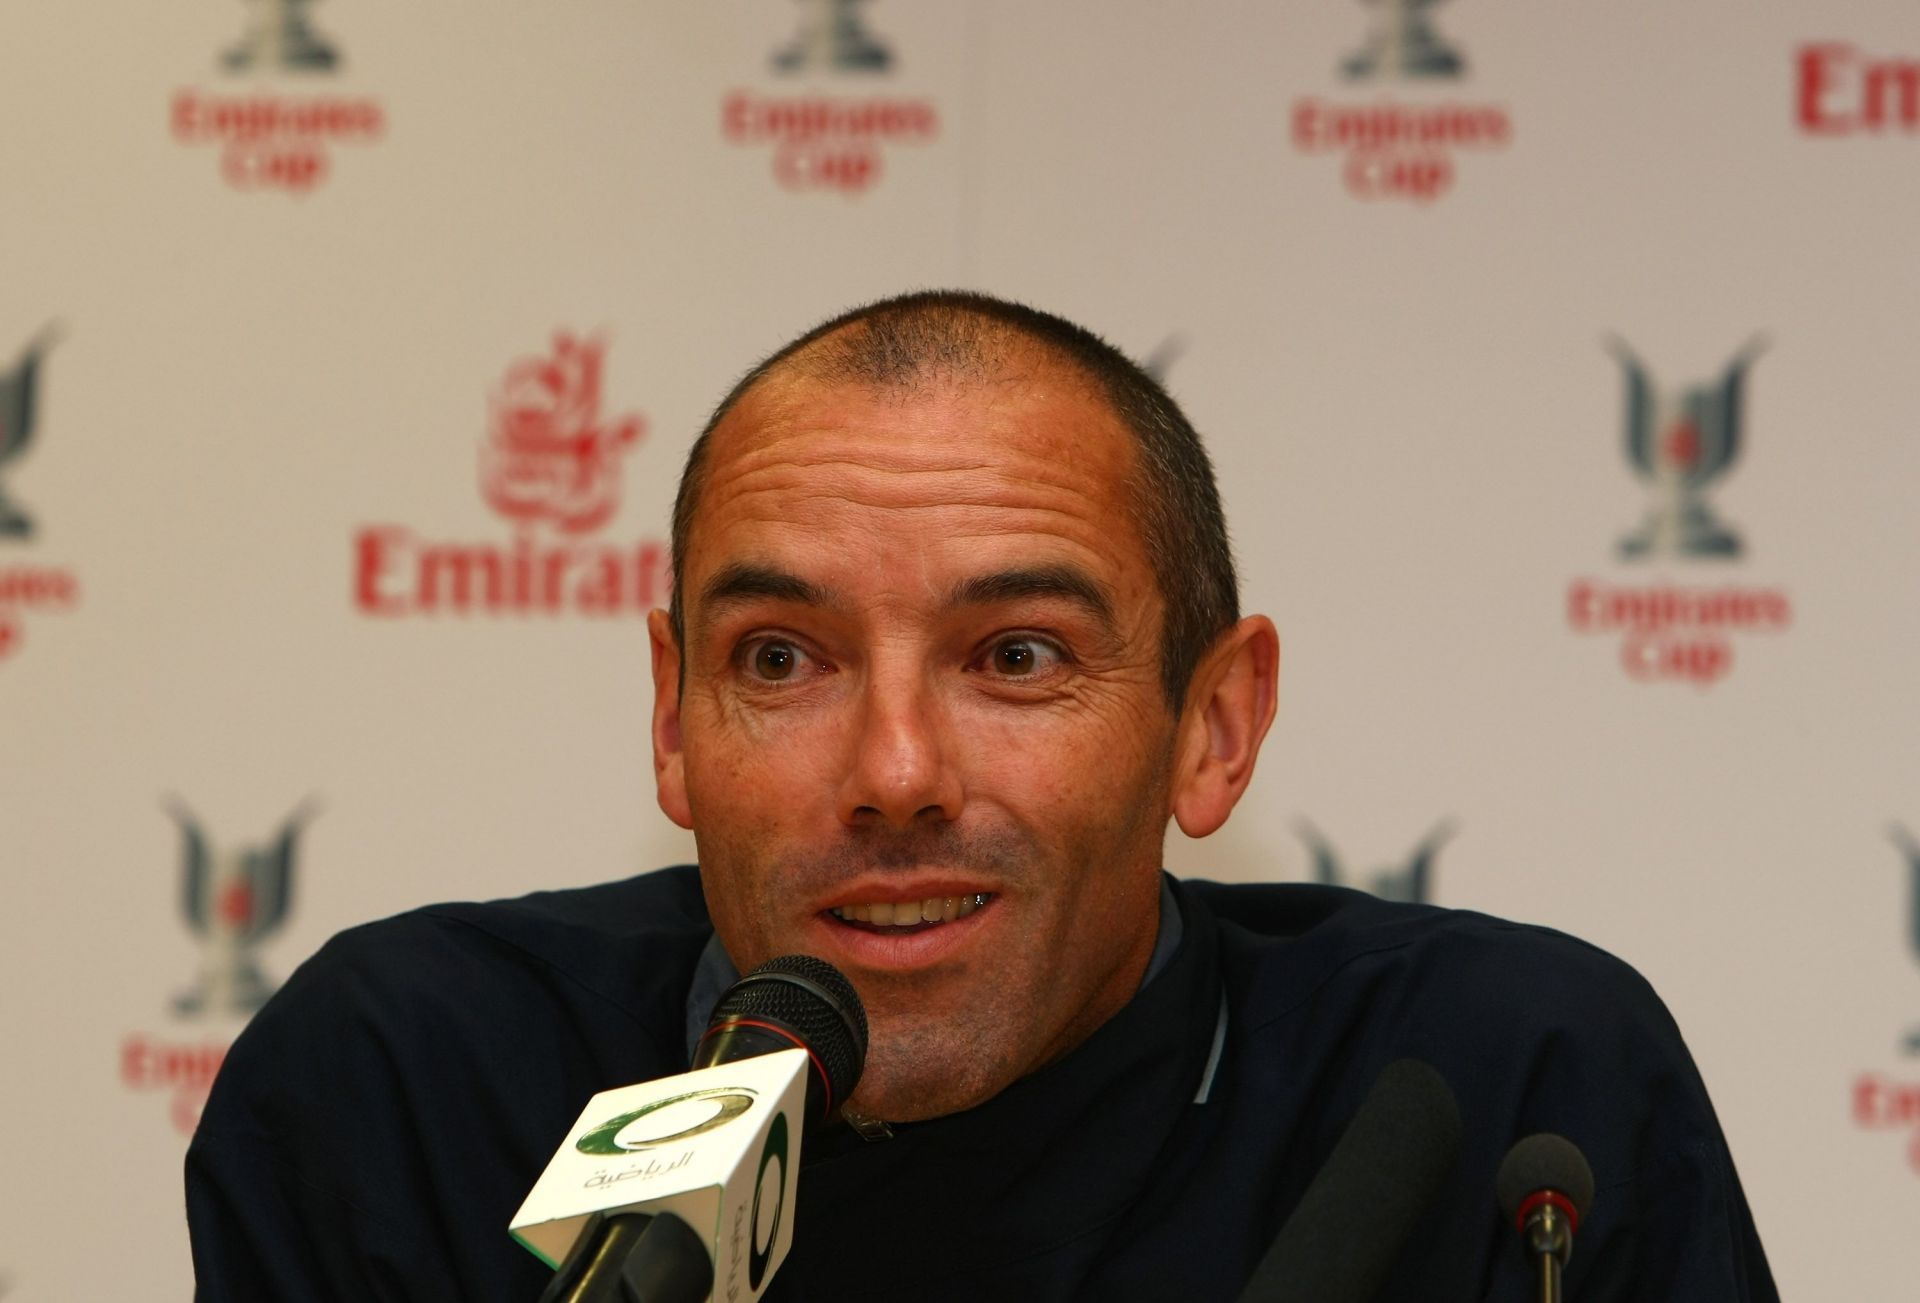 Paul Le Guen spent seven years at Paris Saint Germain from 1991 to 1998